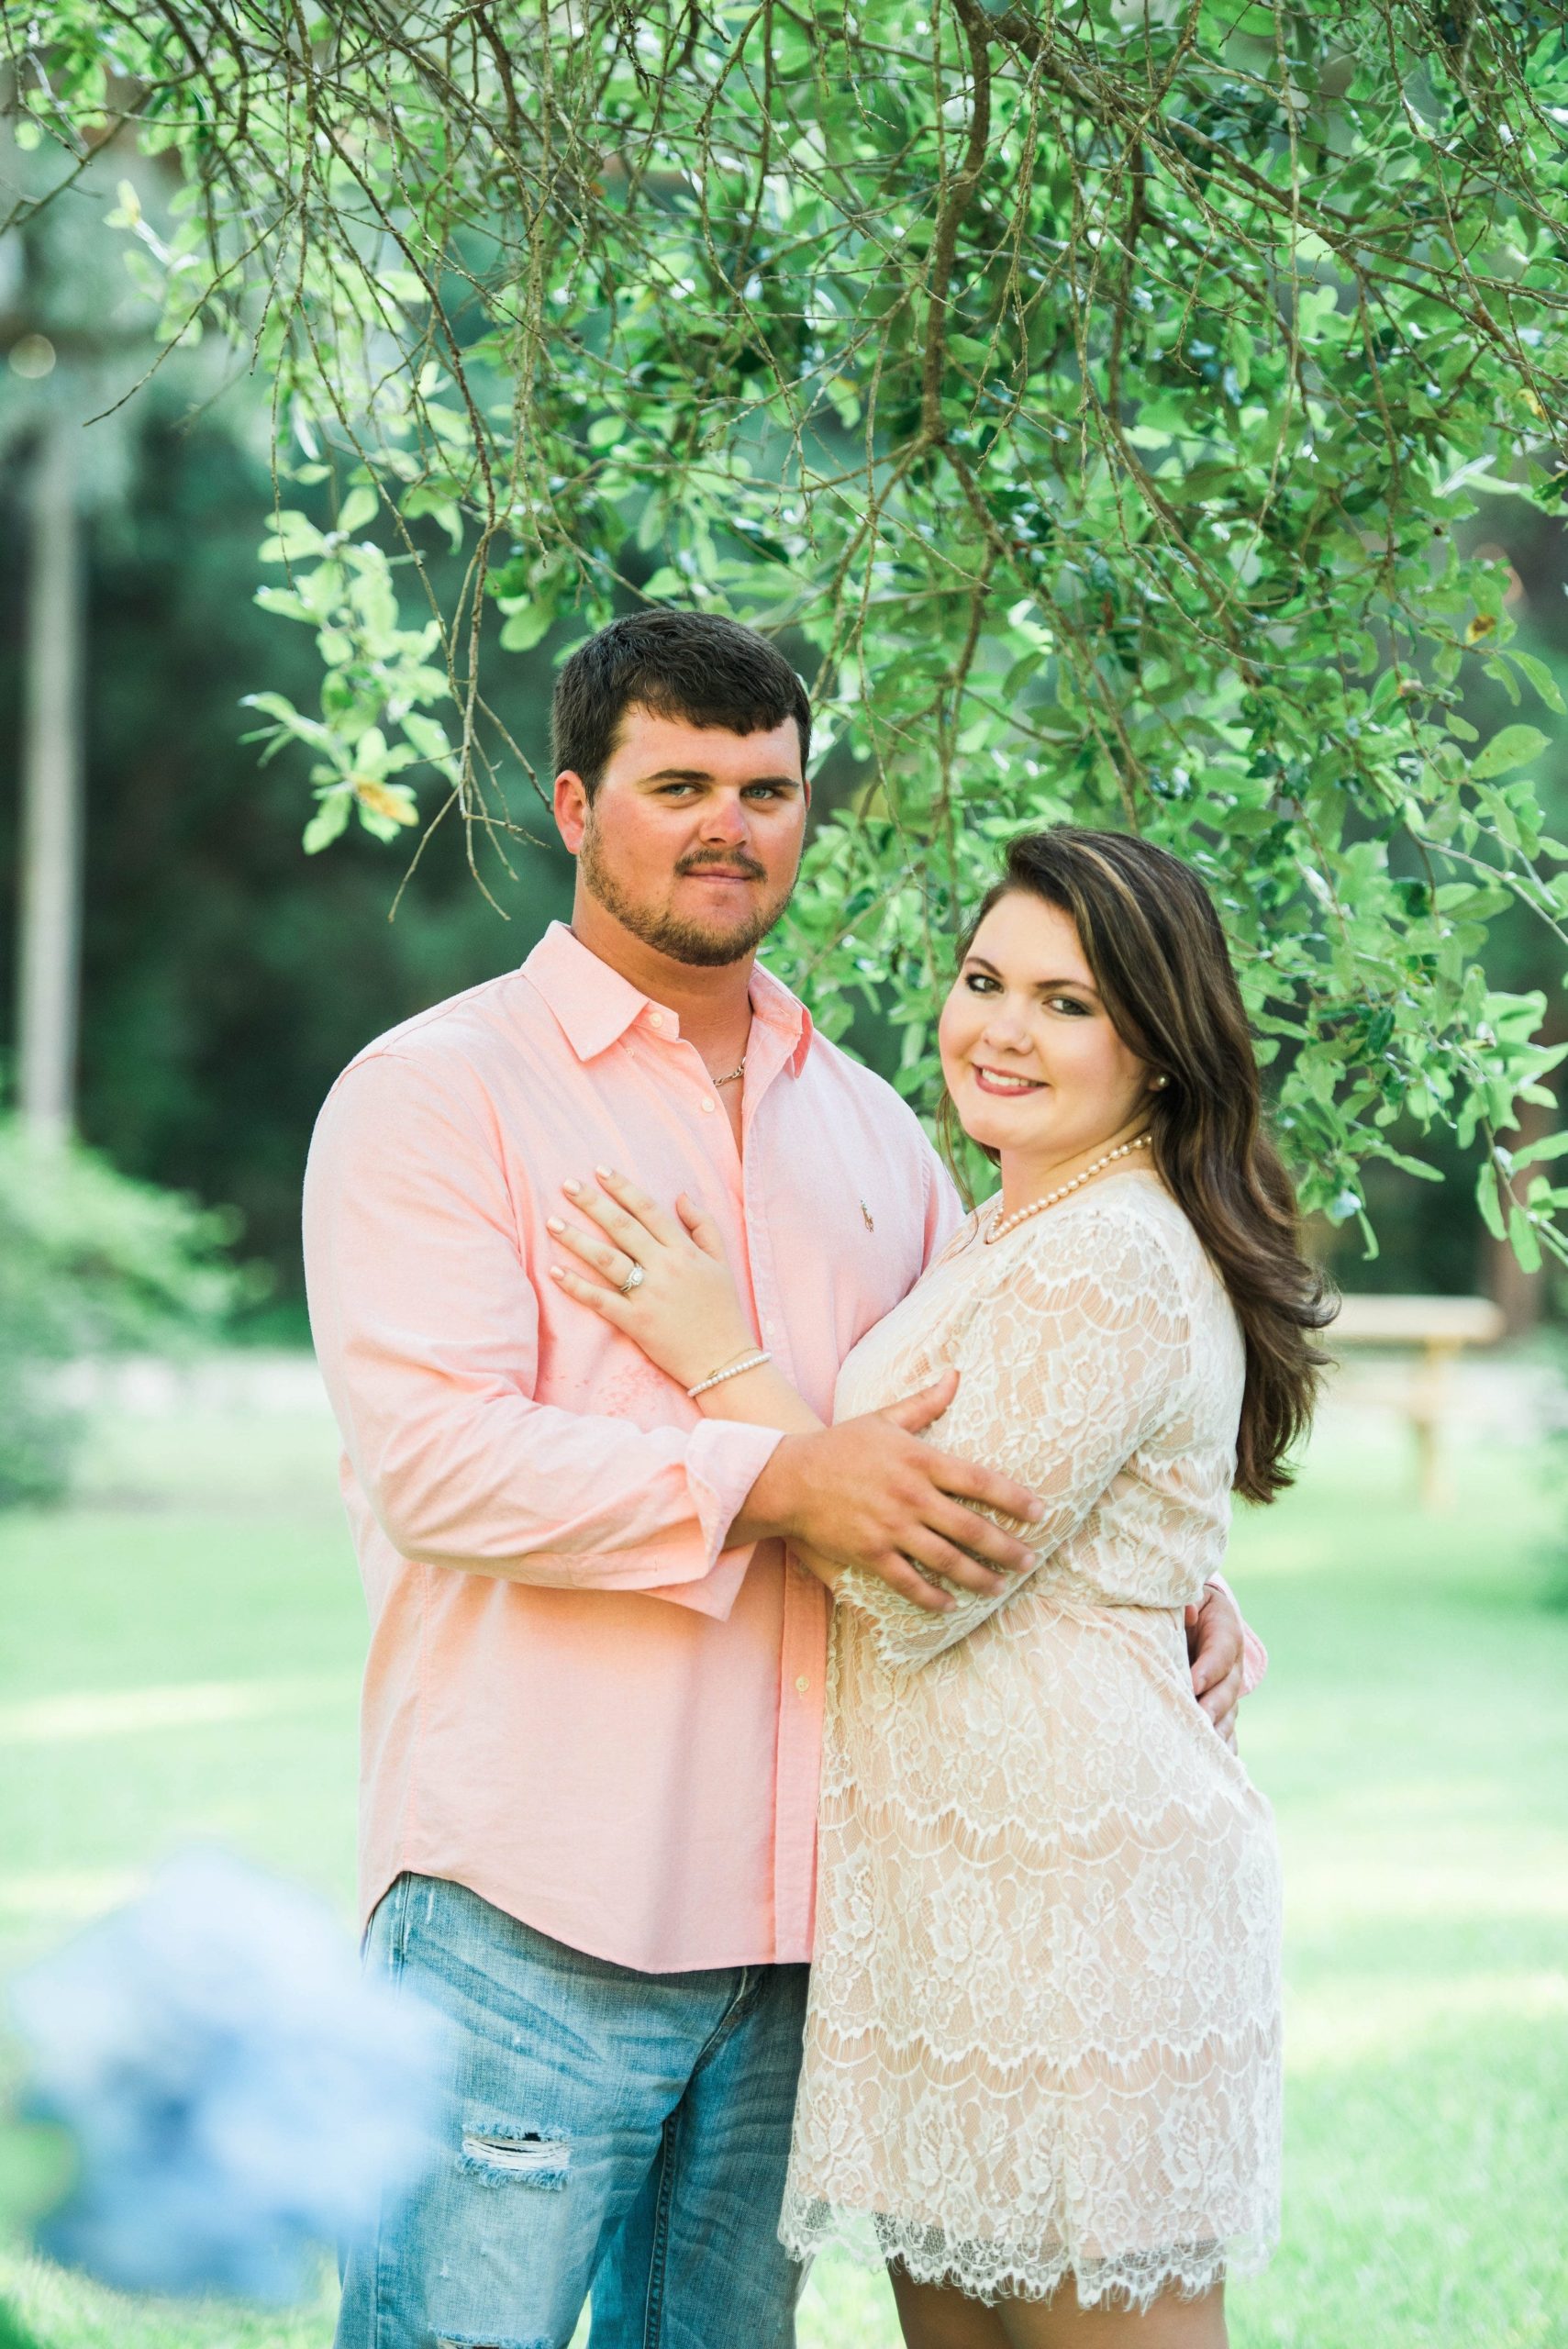 Aericka Brenden O’Neal, of Milton, will wed Nicholas Glen Scott, of Jay, on March 4 in Uriah, Ala. (Special to the Press Gazette)